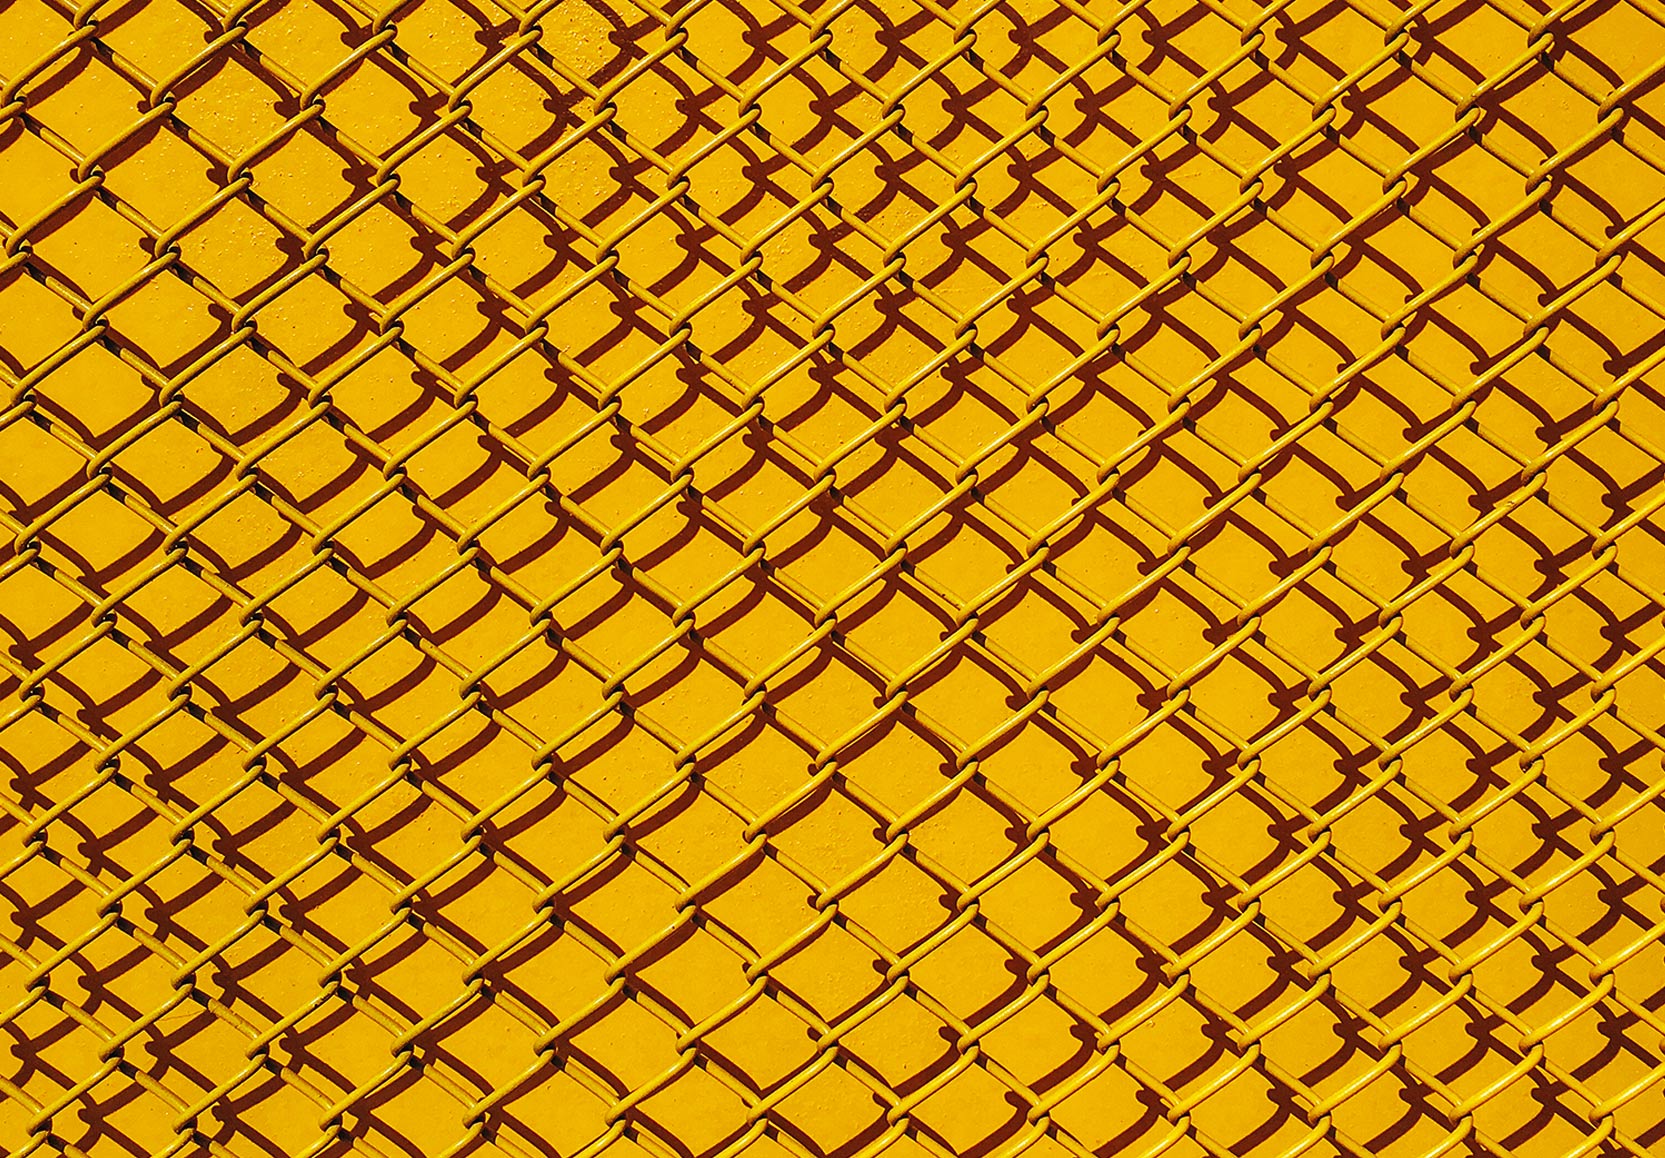 Yellow Fence Graphic